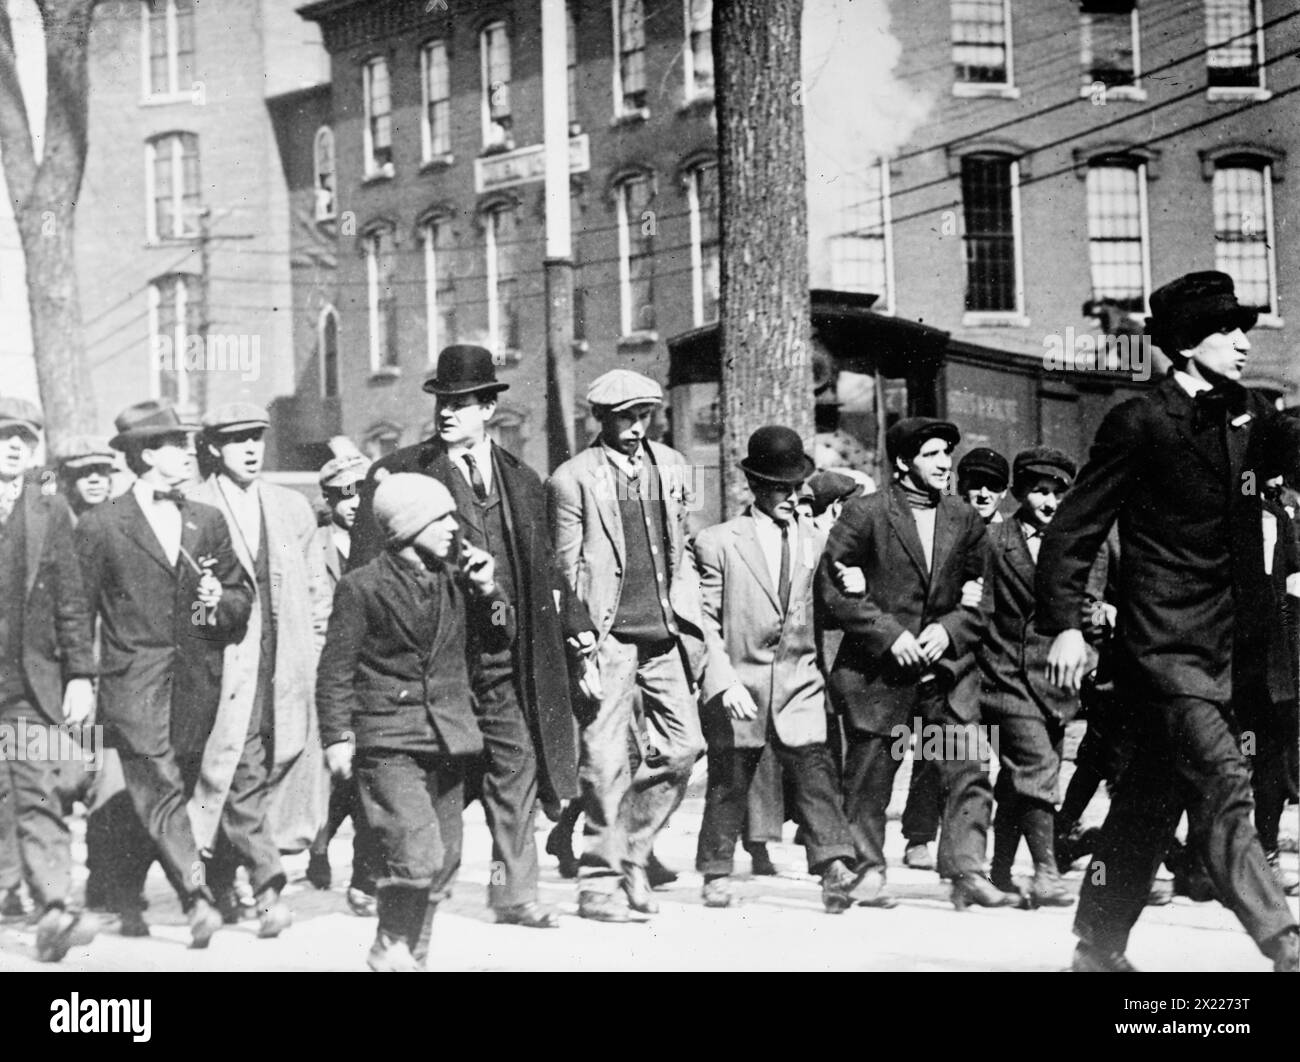 W.D. Haywood leads Lowell strike parade, 1912. Shows William Dudley (Big Bill) Haywood, an American labor movement leader, marching with strikers in Lowell, Massachusetts. Stock Photo